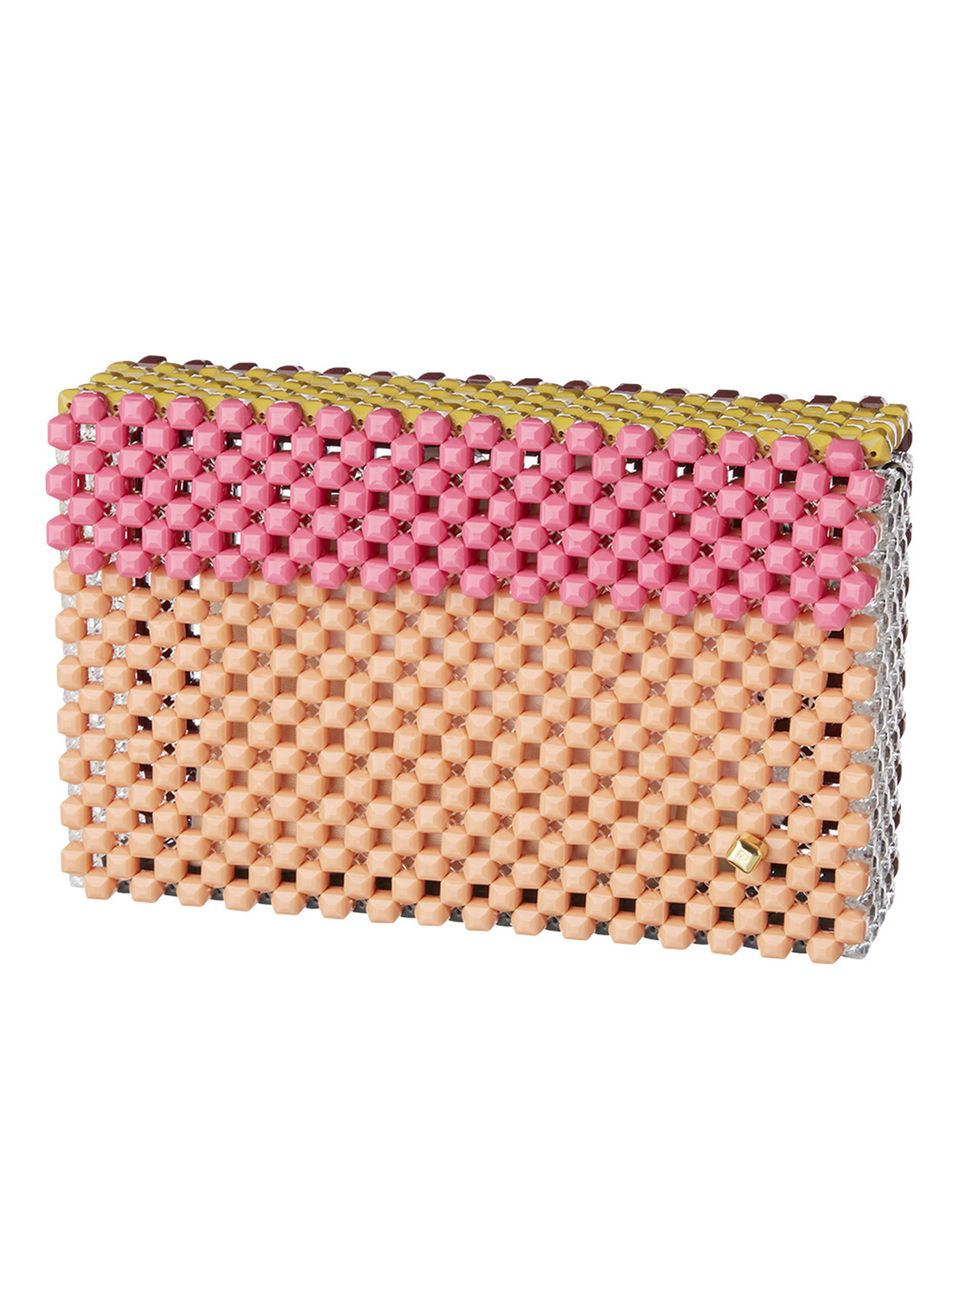 Pattern, Pink, Magenta, Rectangle, Beige, Wallet, Peach, Coin purse, Square, 